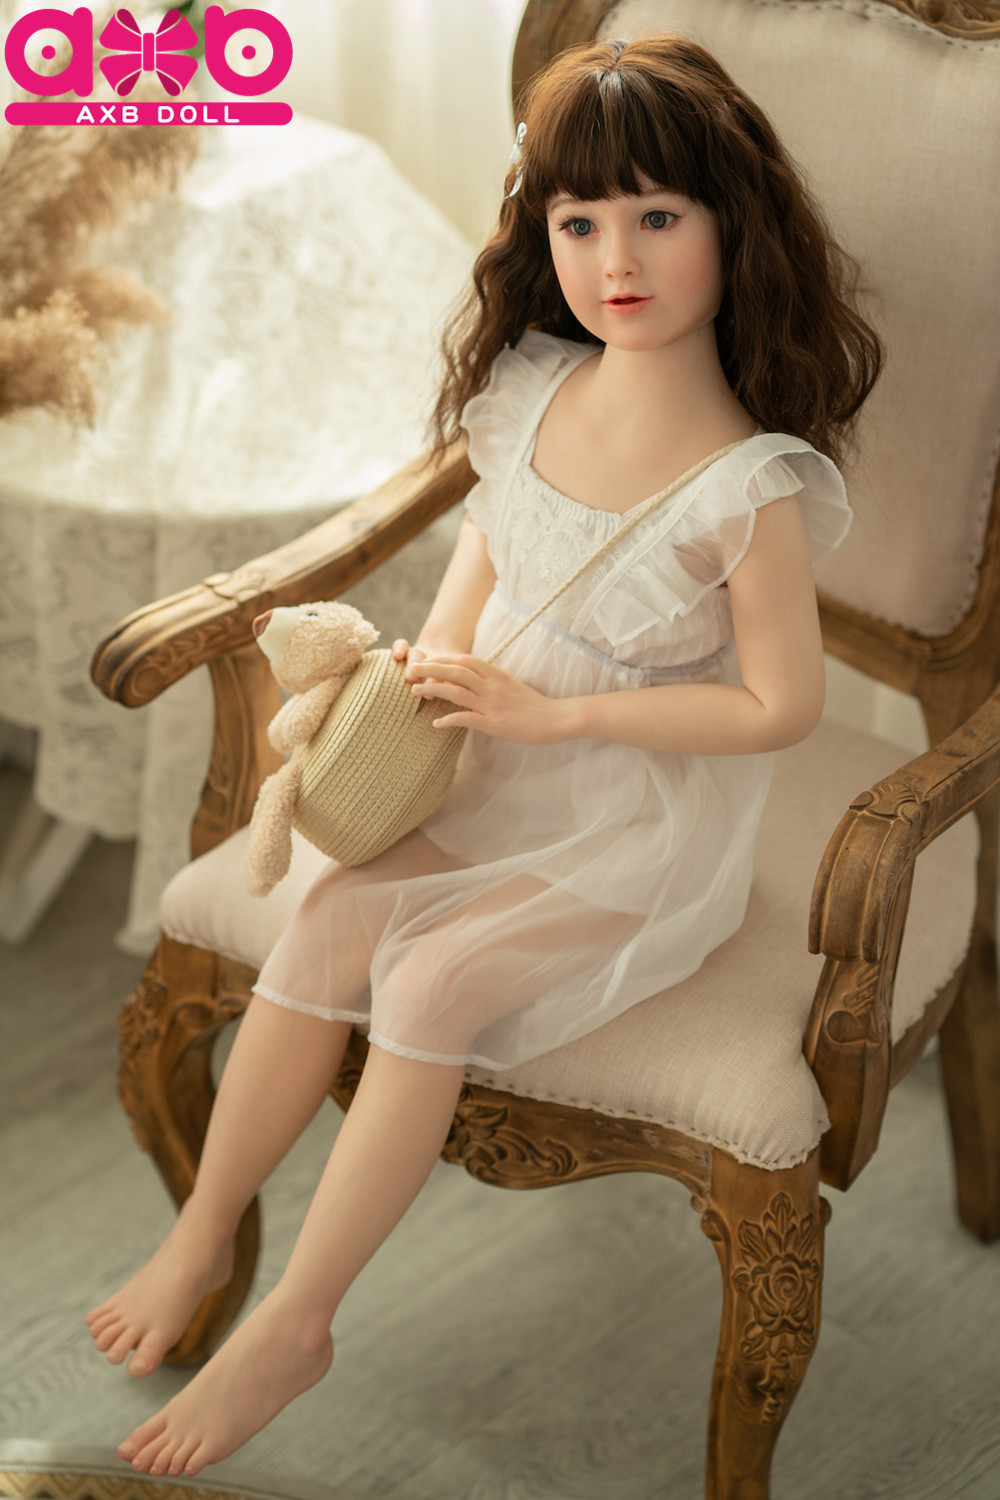 AXBDOLL G34# Super Real Silicone Doll - 画像をクリックして閉じます